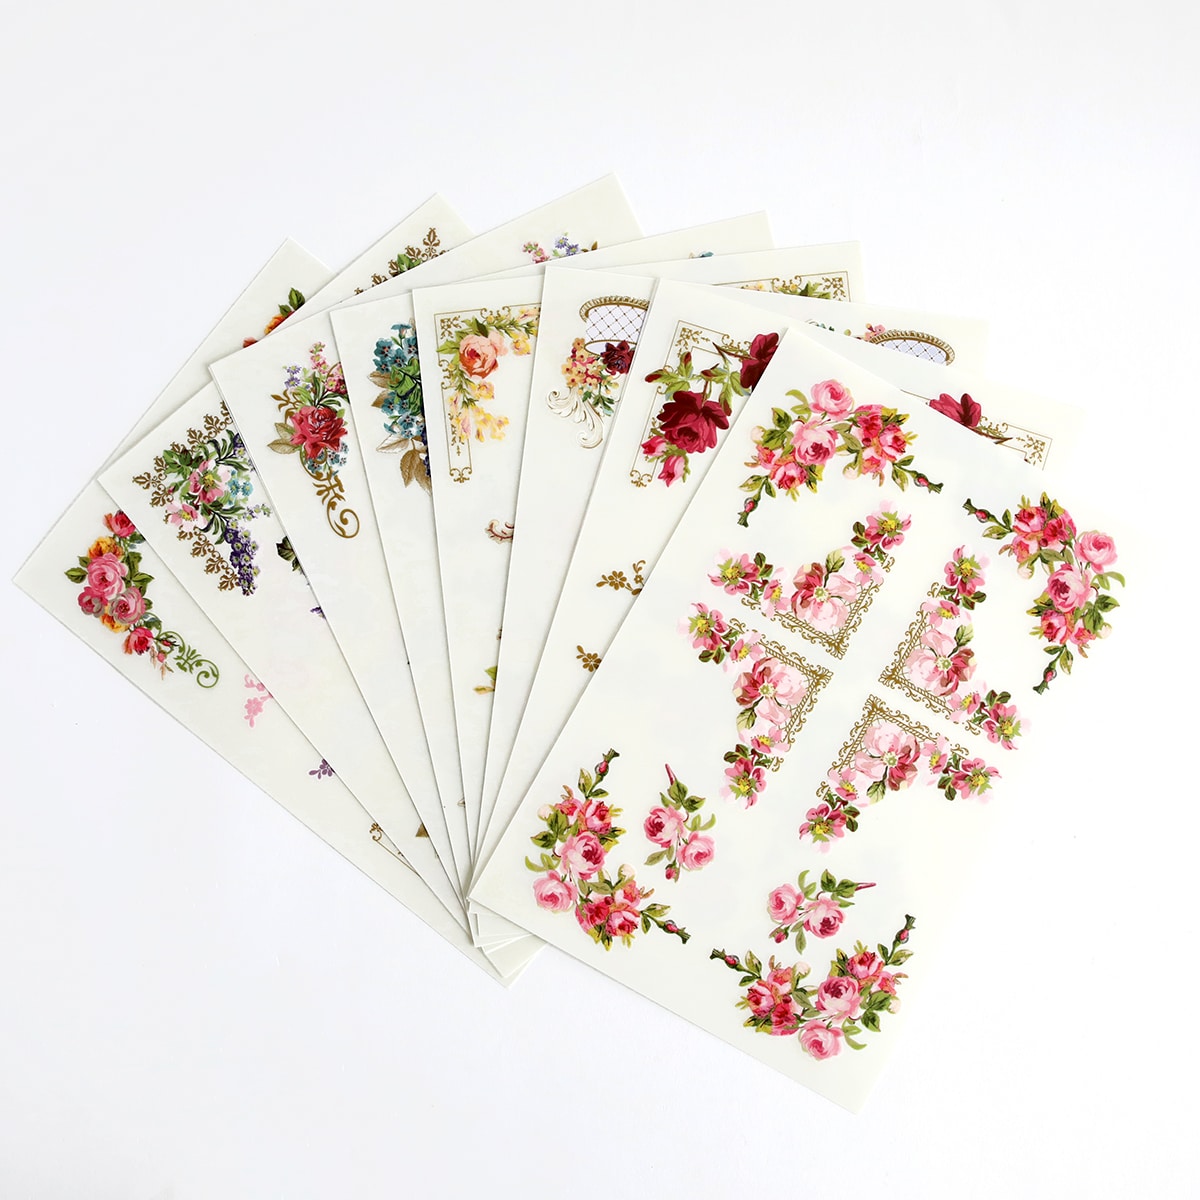 A set of flower shaped stickers on a white surface.